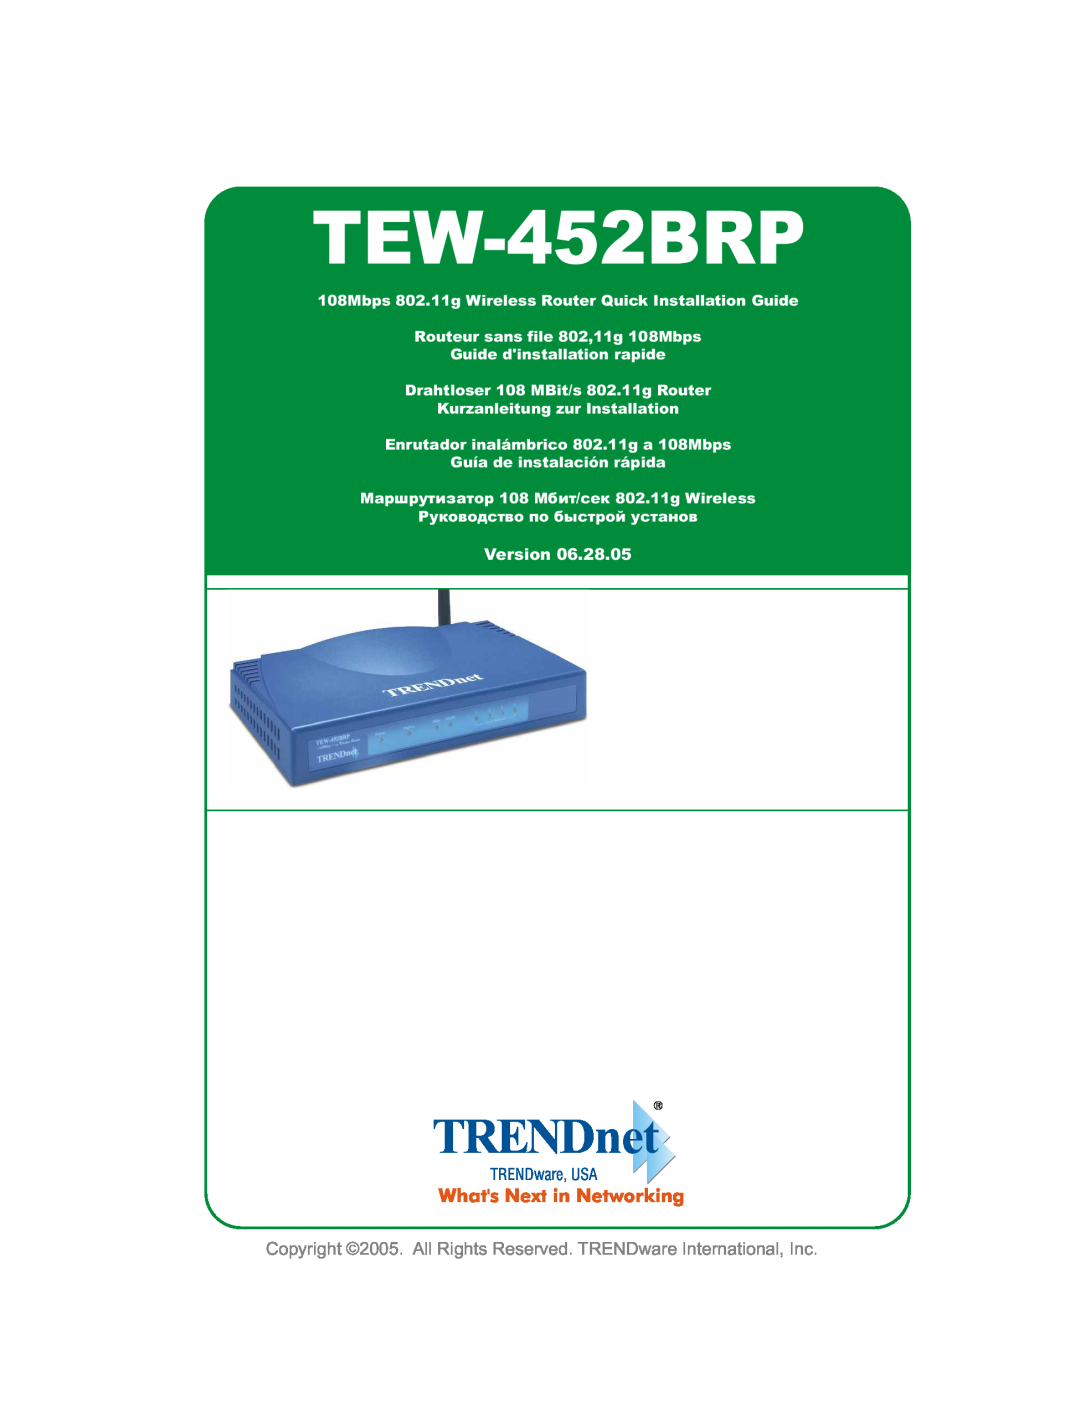 TRENDnet 108Mbps Wireless Super G Broadband Router manual TEW-452BRP, TRENDnet, Whats Next in Networking, TRENDware, USA 